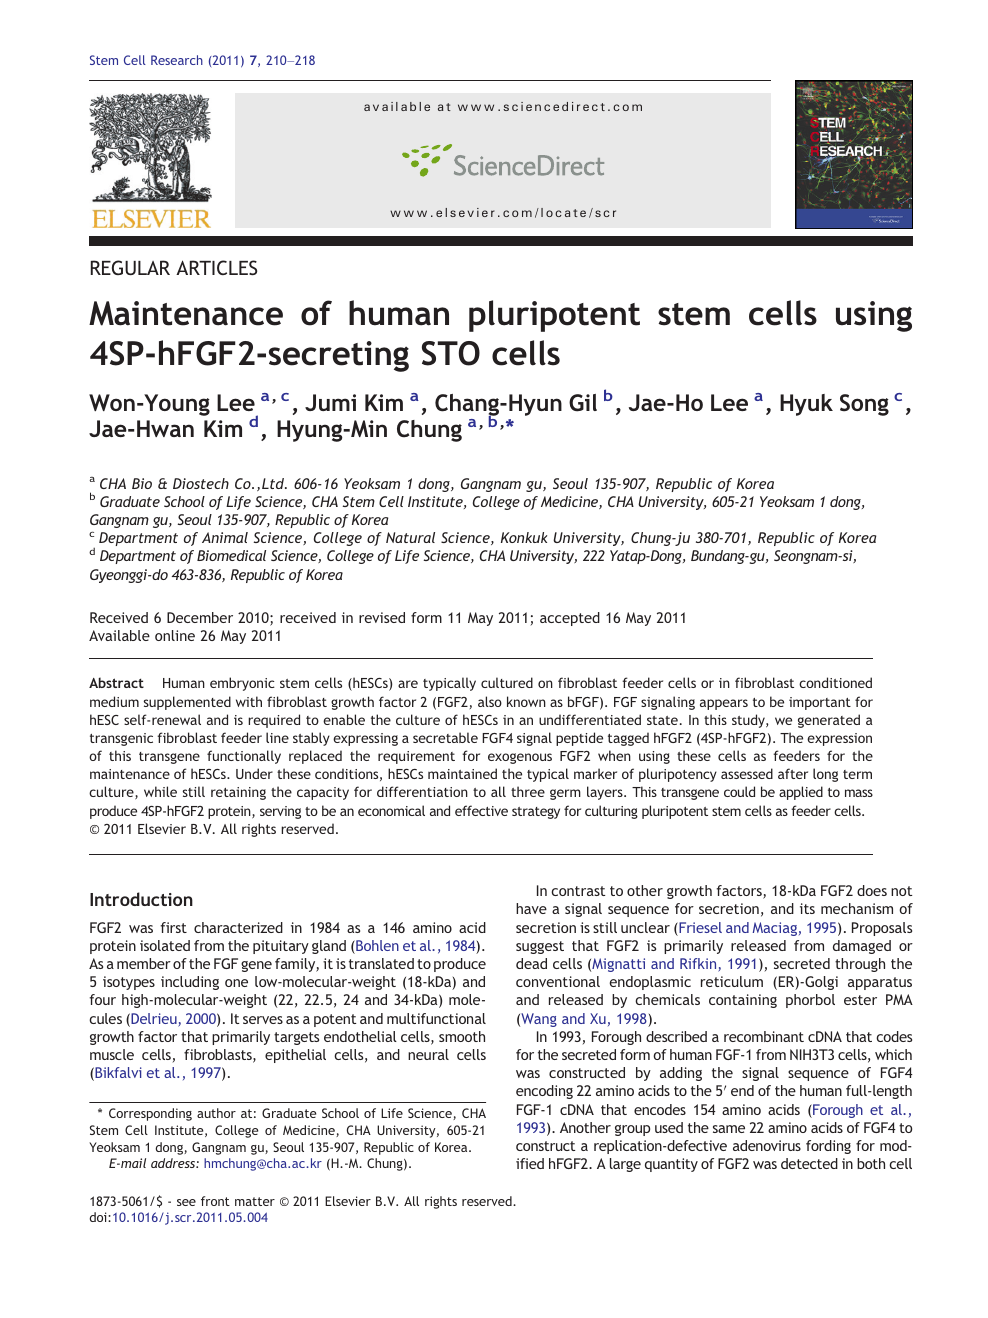 Maintenance Of Human Pluripotent Stem Cells Using 4sp Hfgf2 Secreting Sto Cells Topic Of Research Paper In Biological Sciences Download Scholarly Article Pdf And Read For Free On Cyberleninka Open Science Hub